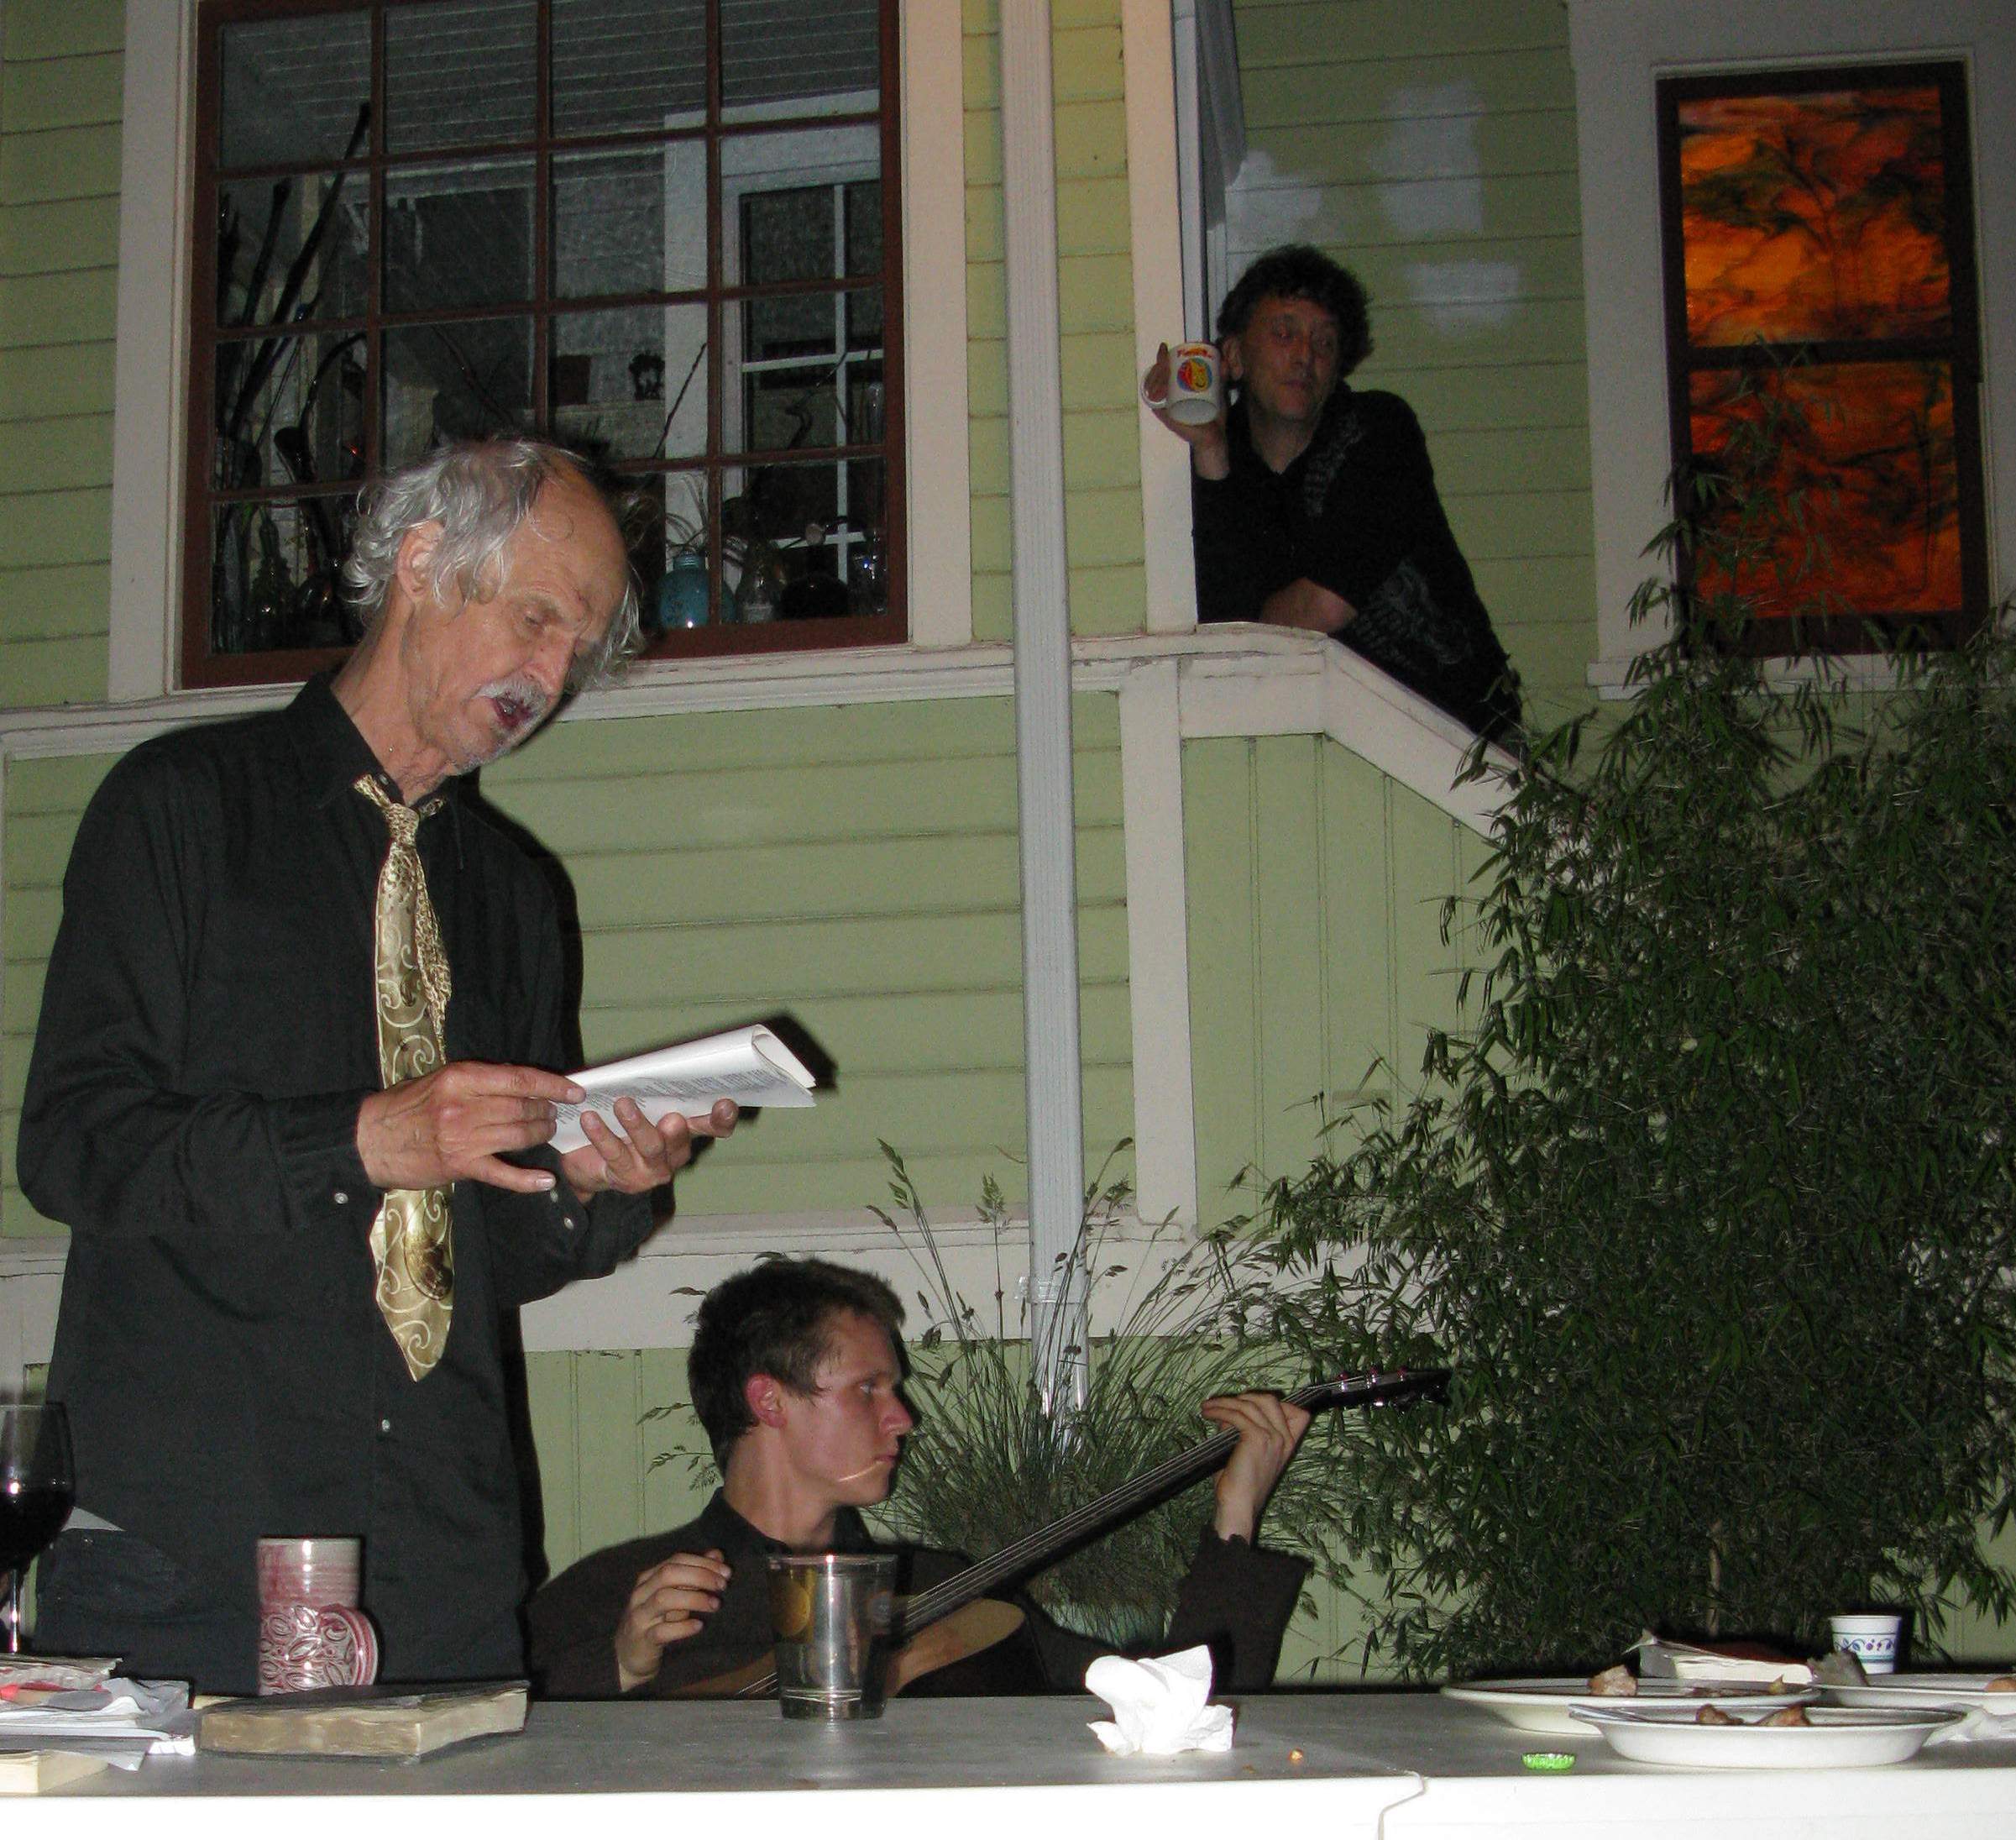 Walt reads the Red Ambler poems, accompanied by Dylan